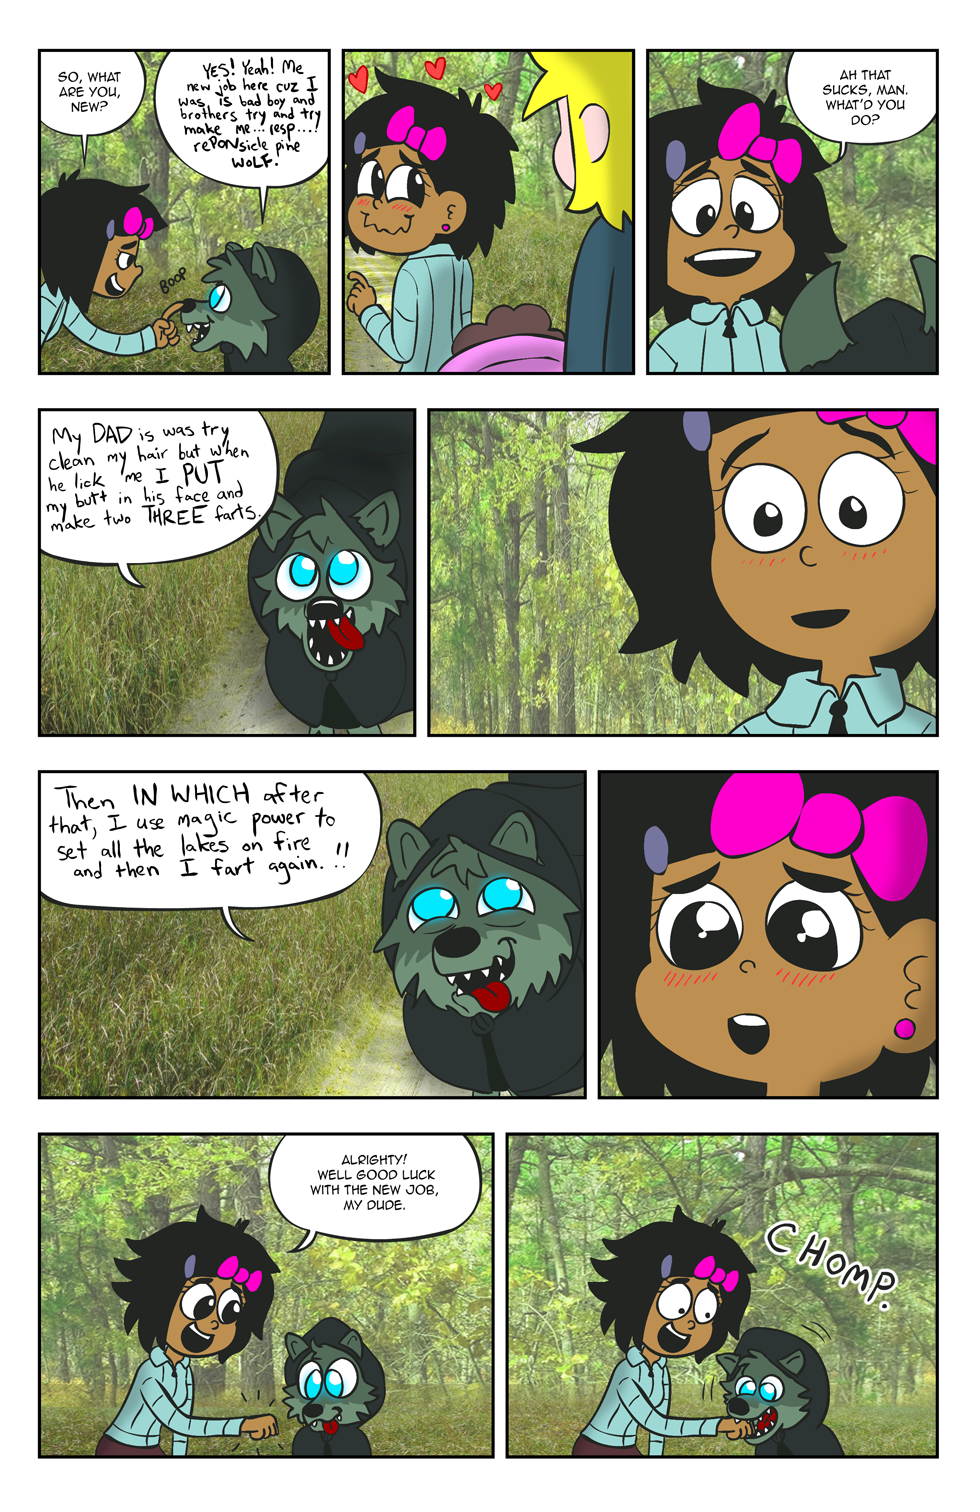 041: Don’t Pull Your Love – Page 2/5